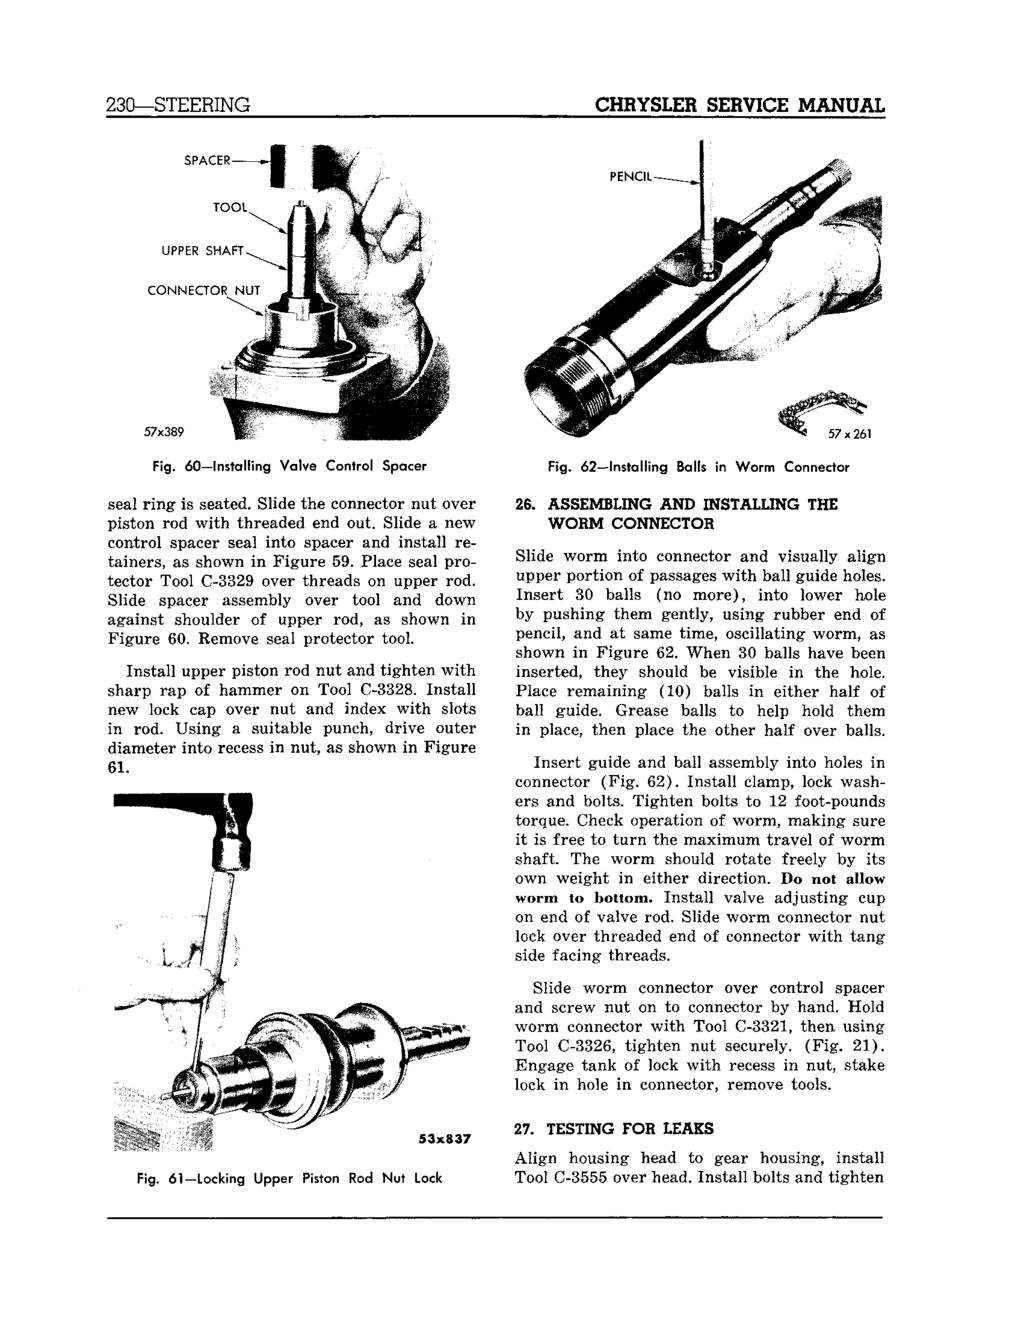 230 STEERING CHRYSLER SERVICE MANUAL Fig. 60 Installing Valve Control Spacer Fig. 62 Installing Balls in Worm Connector seal ring is seated.